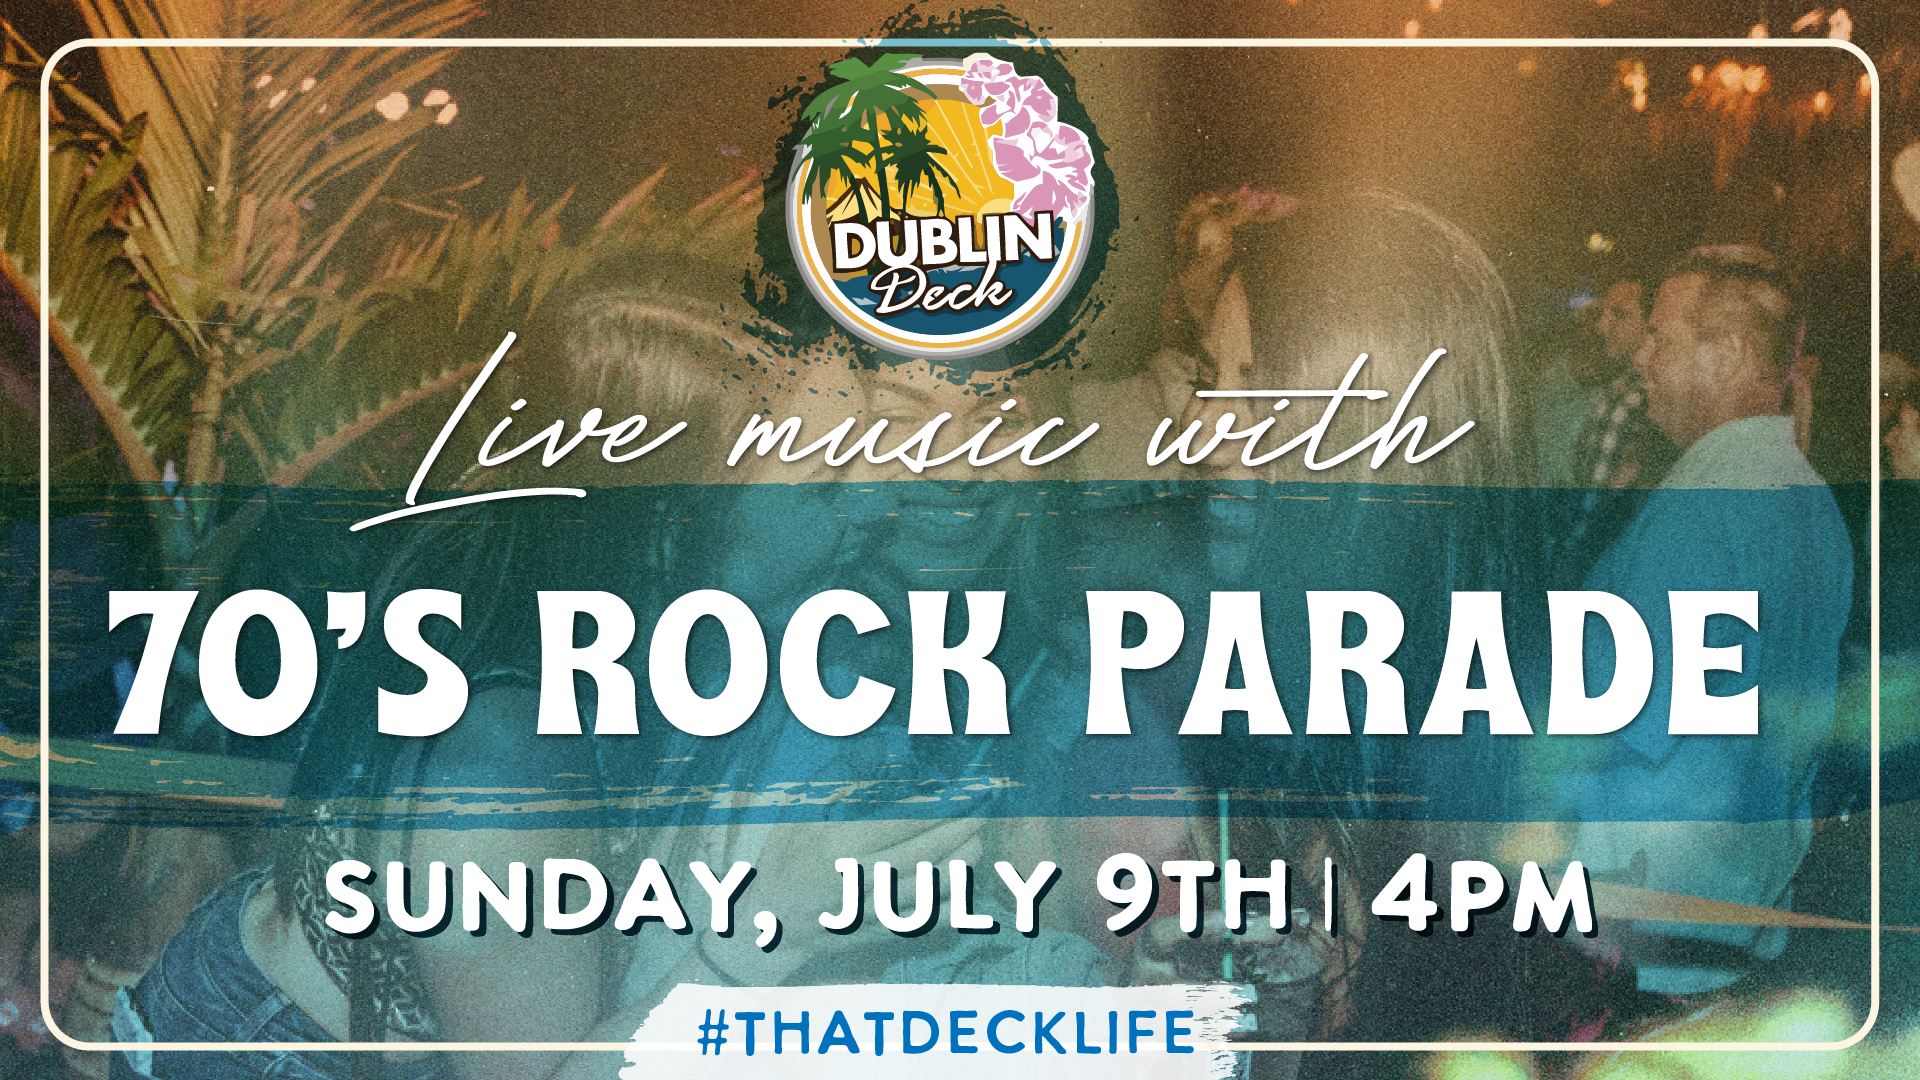 End the weekend off right enjoying the sounds of 70's Rock Parade! Music begins at 4PM